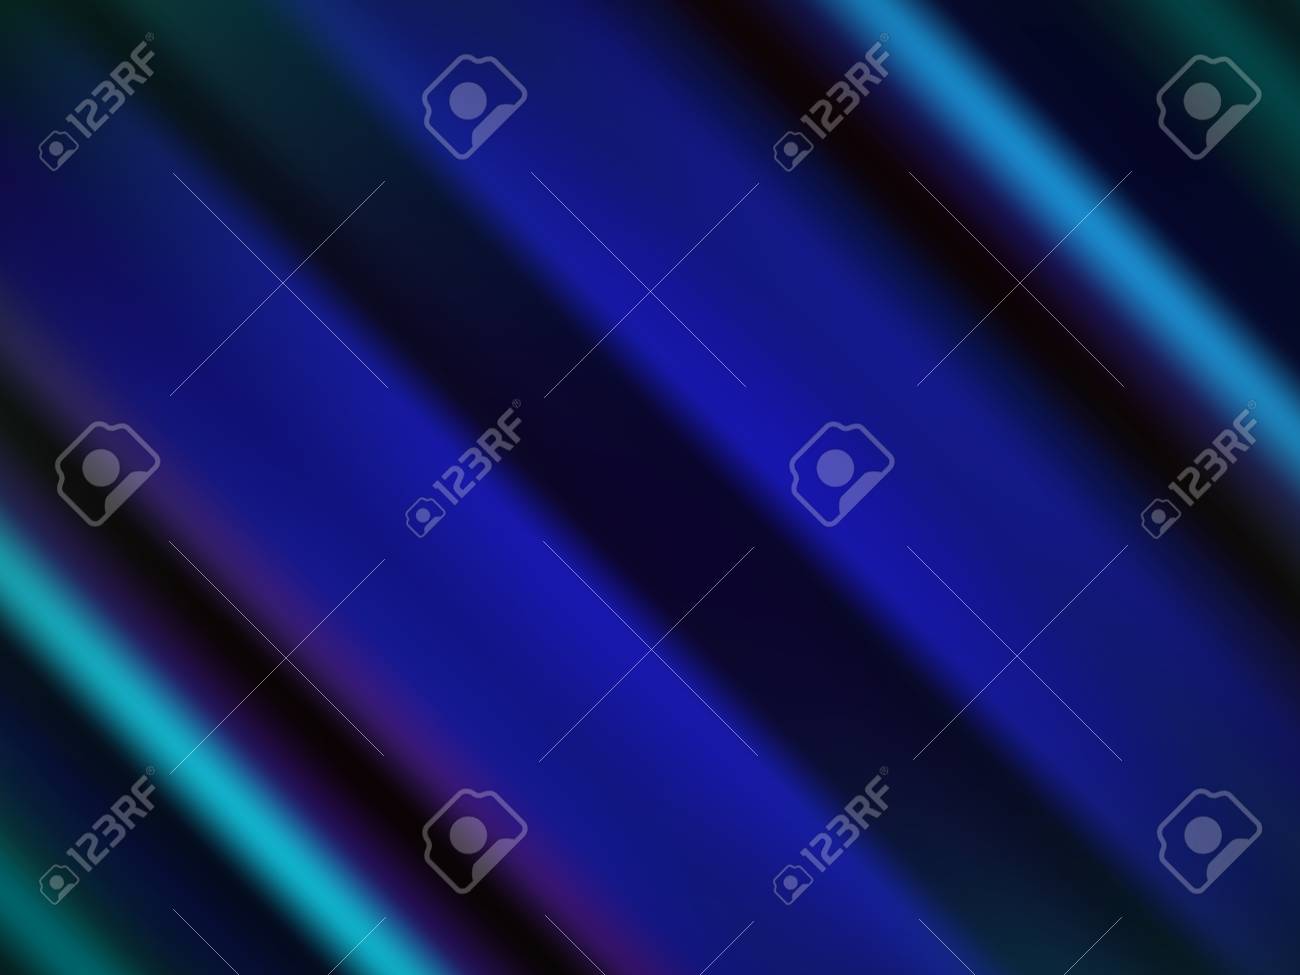 Abstract Blurry Wallpaper With Many Different Colors Royalty